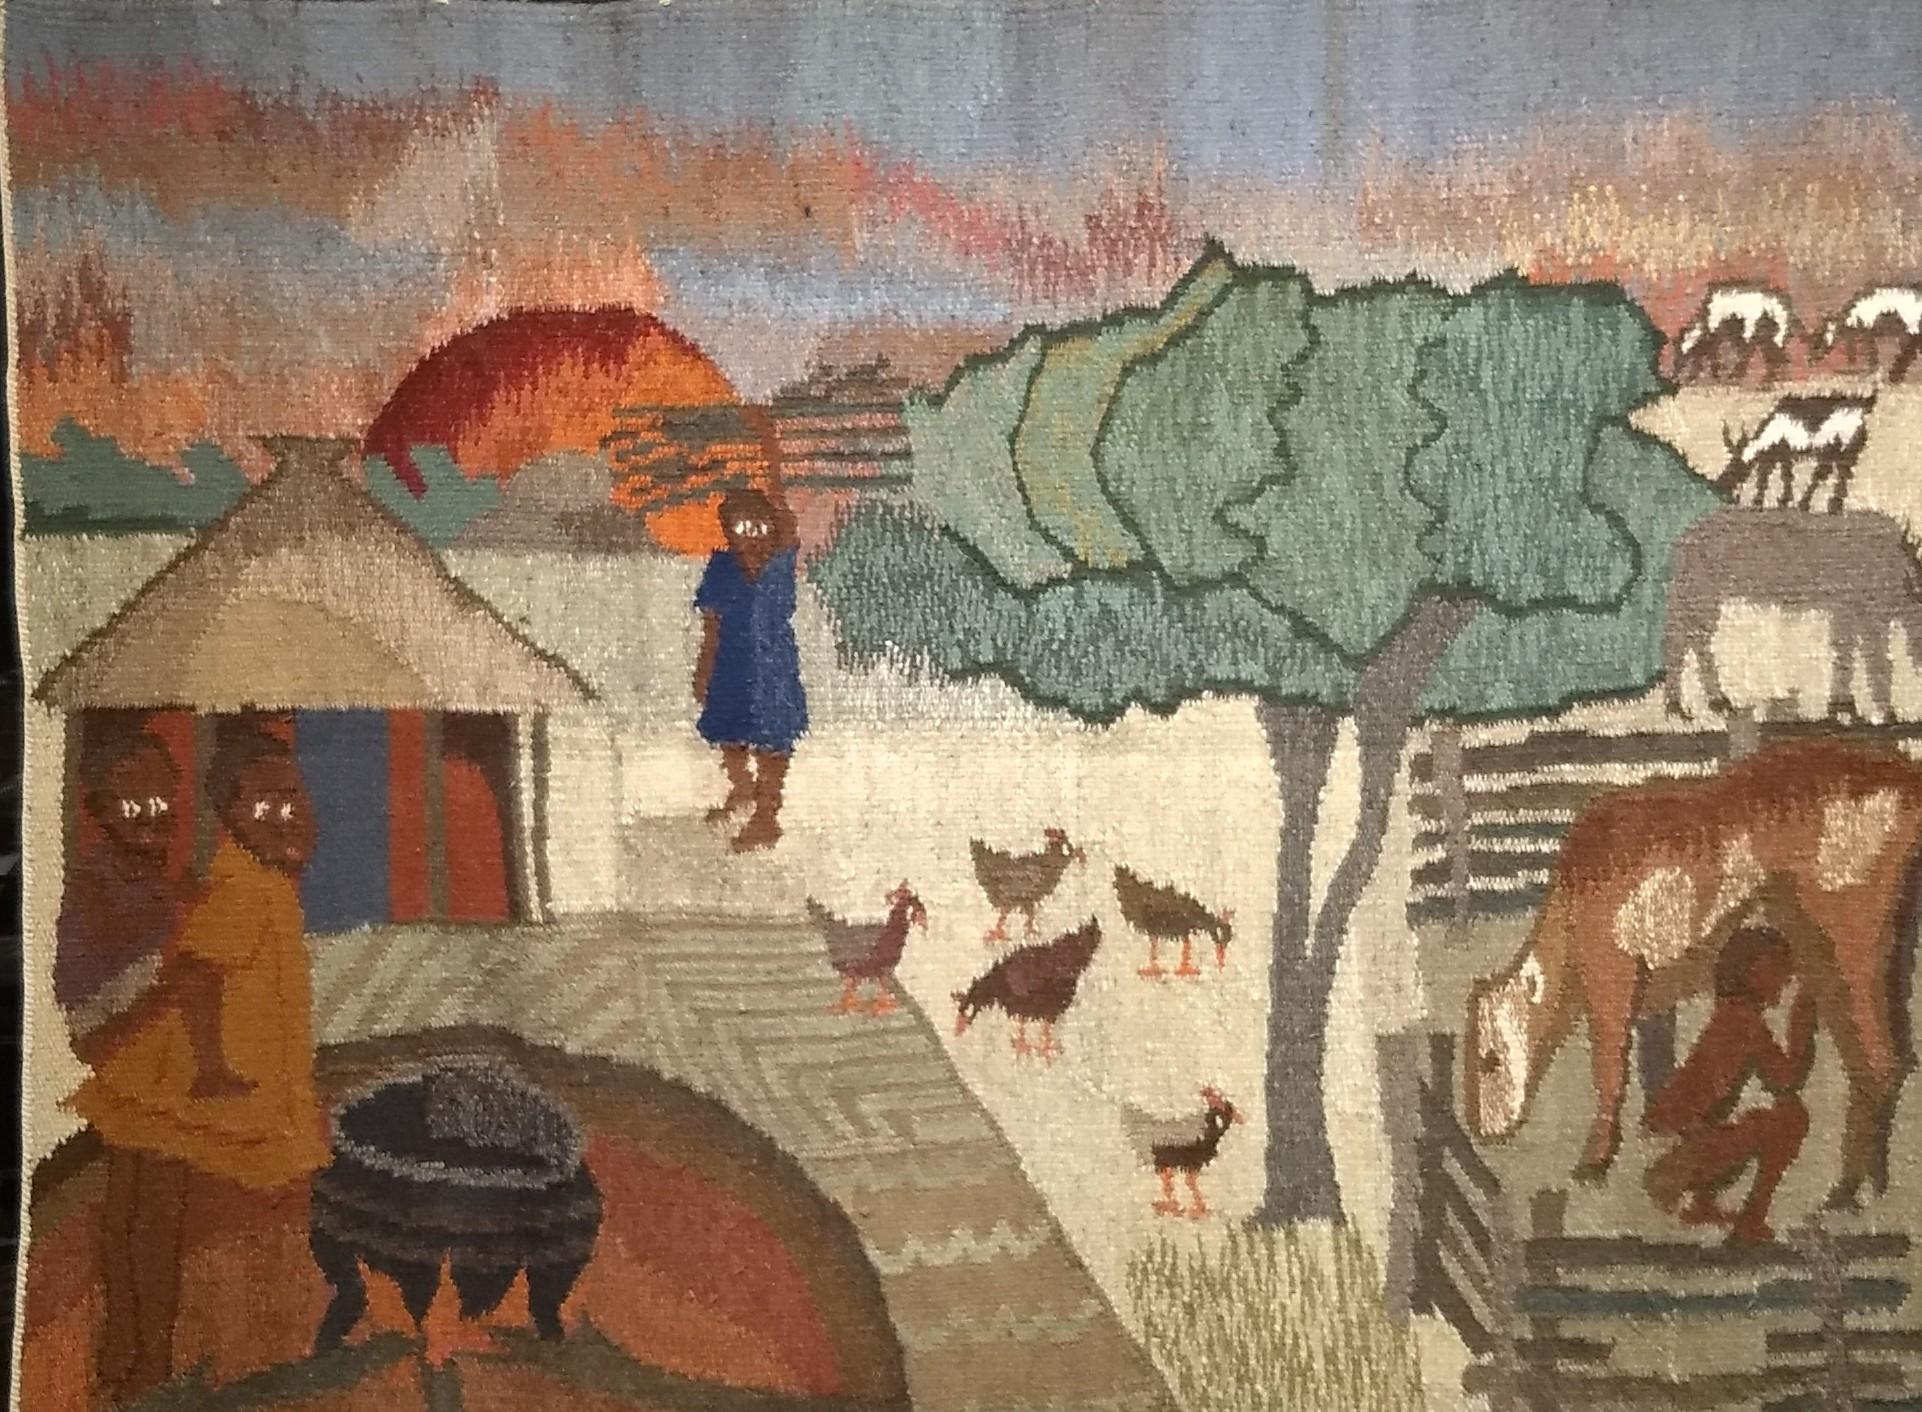 Vintage Hand Woven African Tapestry Depicting Life Scenes Around a Village For Sale 1